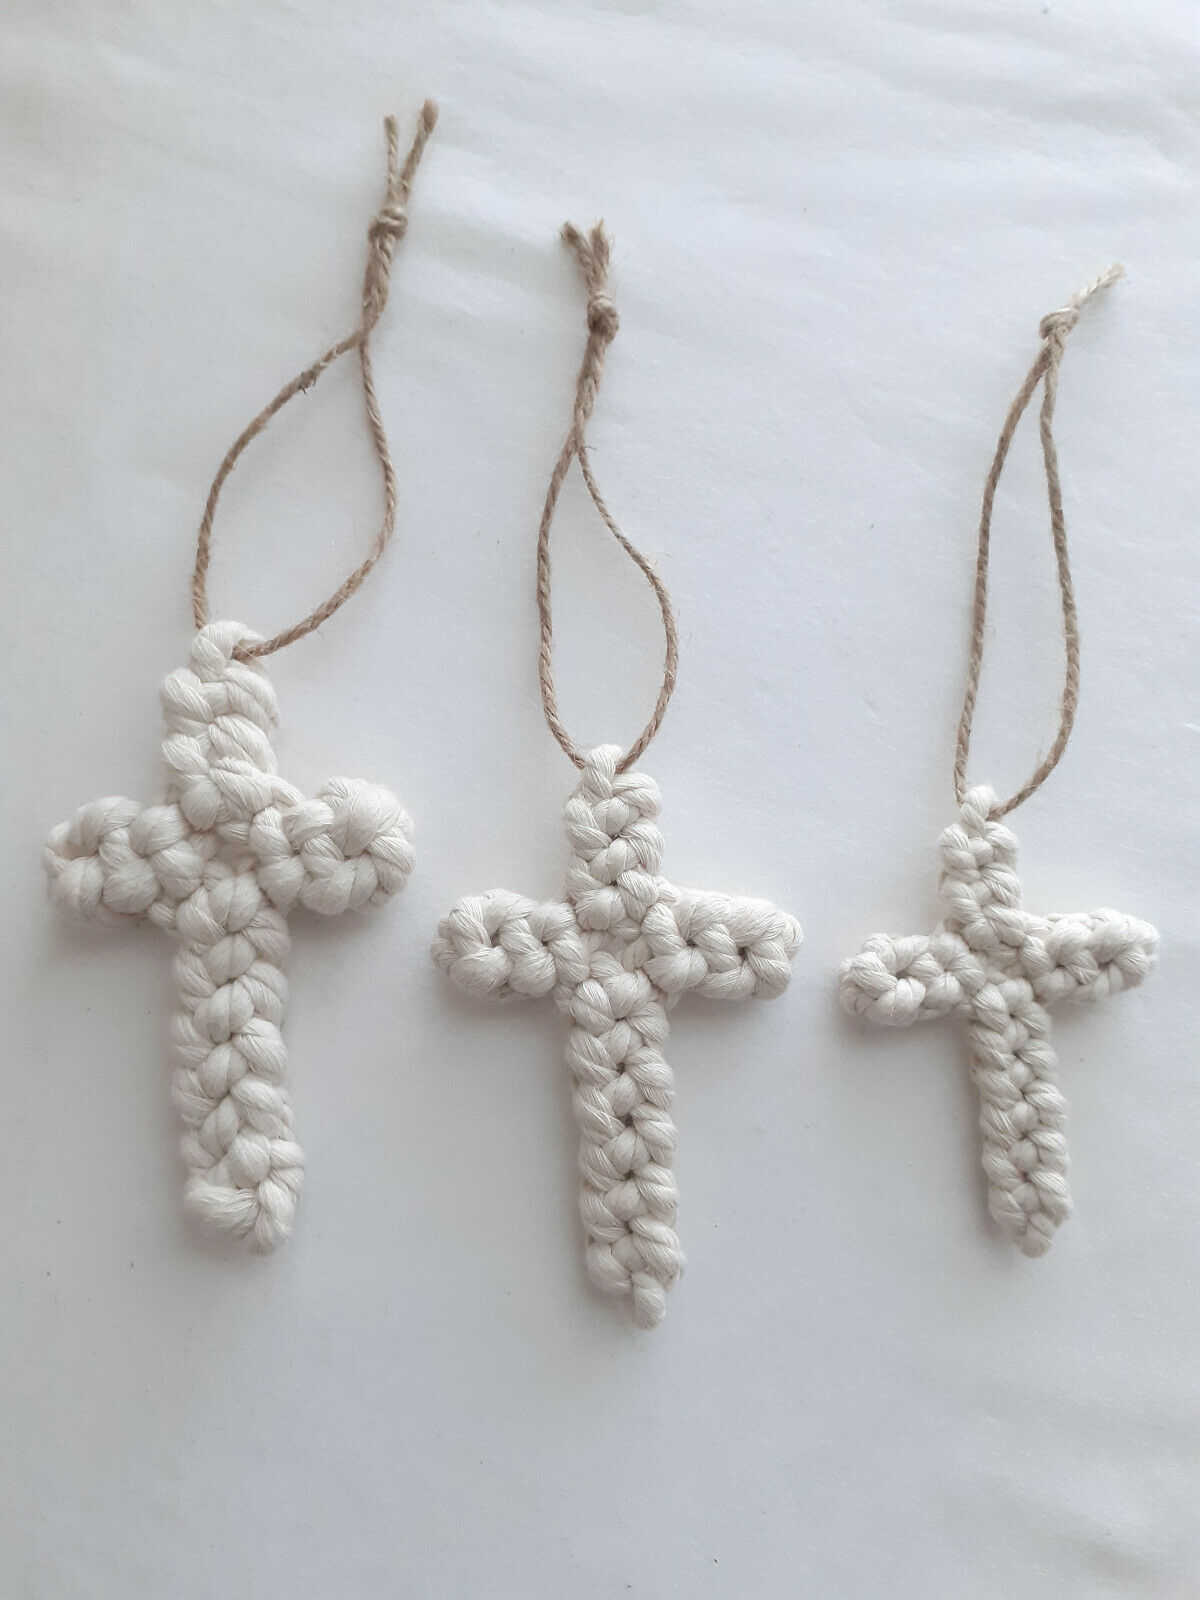 Primary image for Cotton Rope Cross, Wall Cross, Religious Home Decor, Rope, Rustic Decor